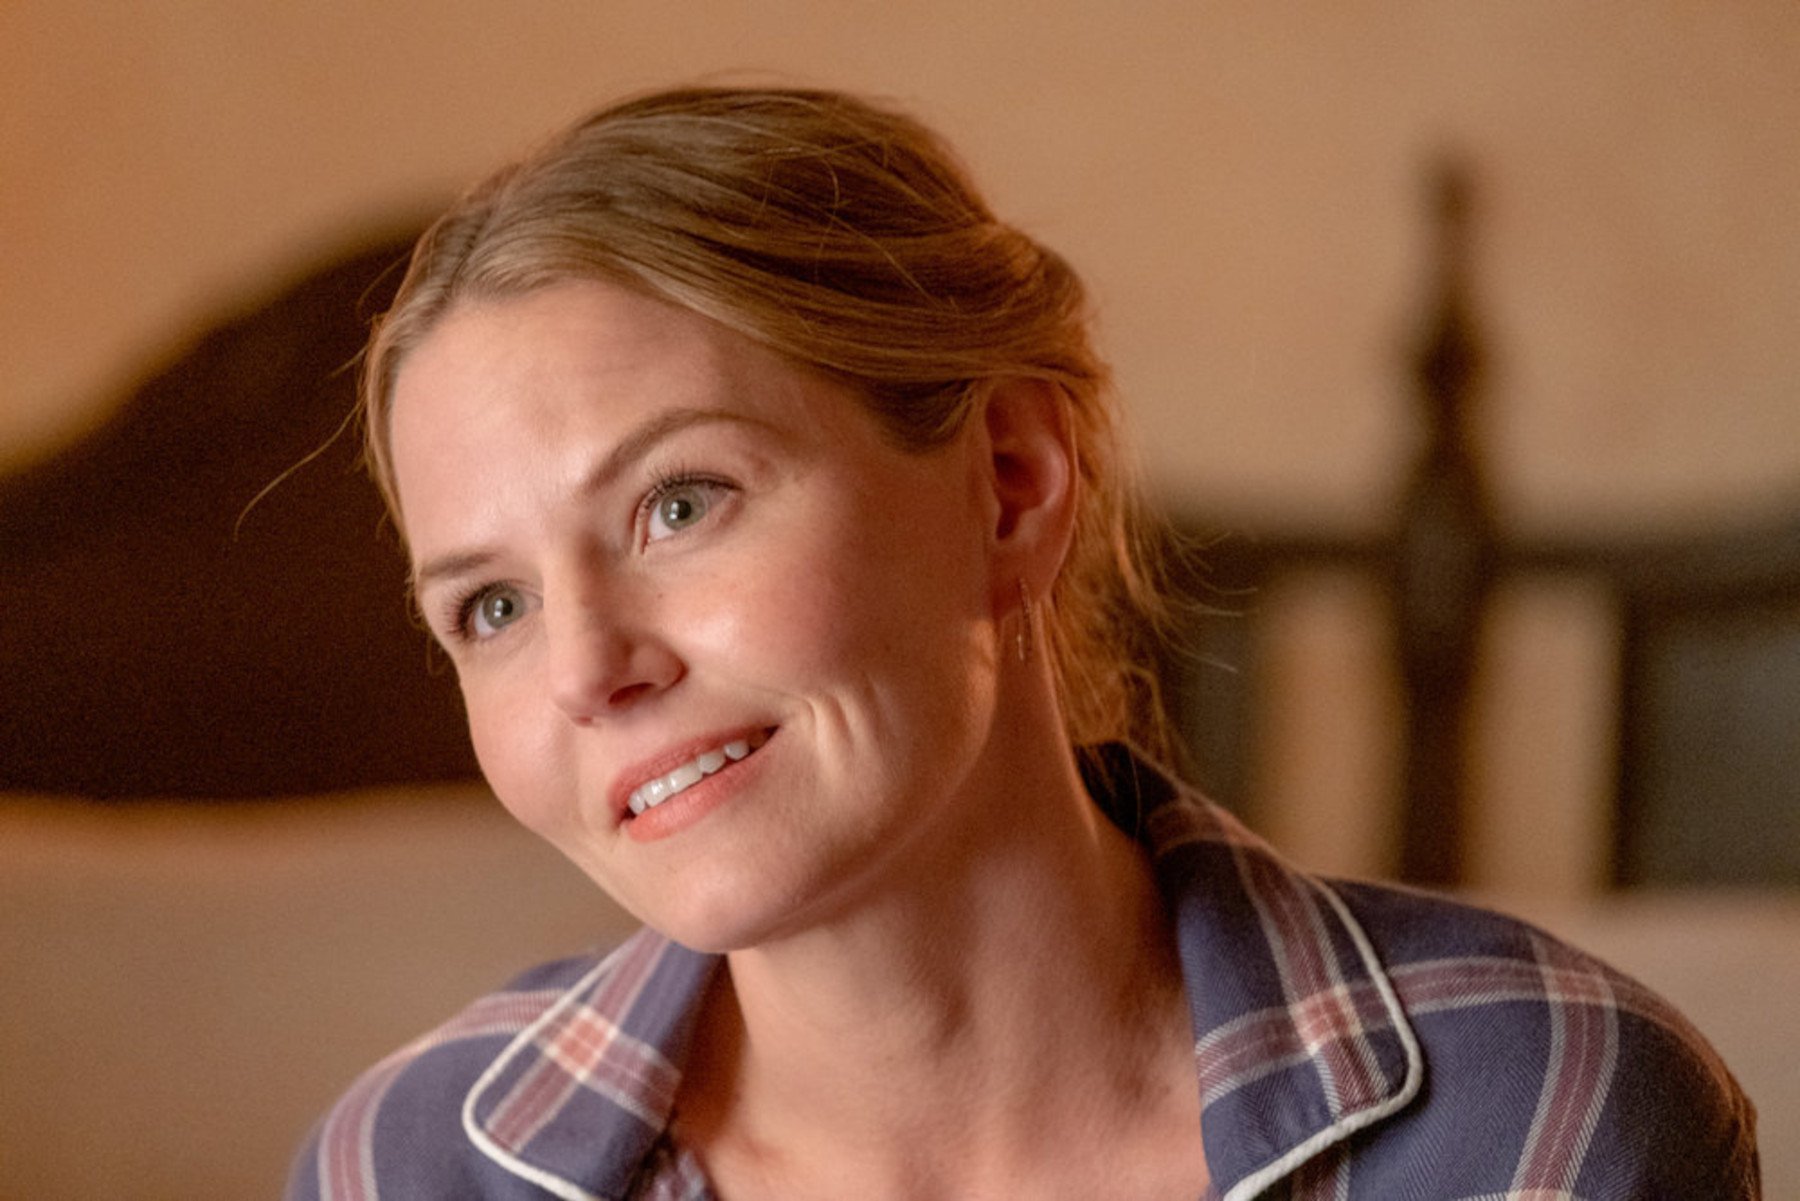 Jennifer Morrison as Cassidy Sharp in 'This Is Us' Season 6. She's wearing a plaid shirt, leaning forward, and smiling.